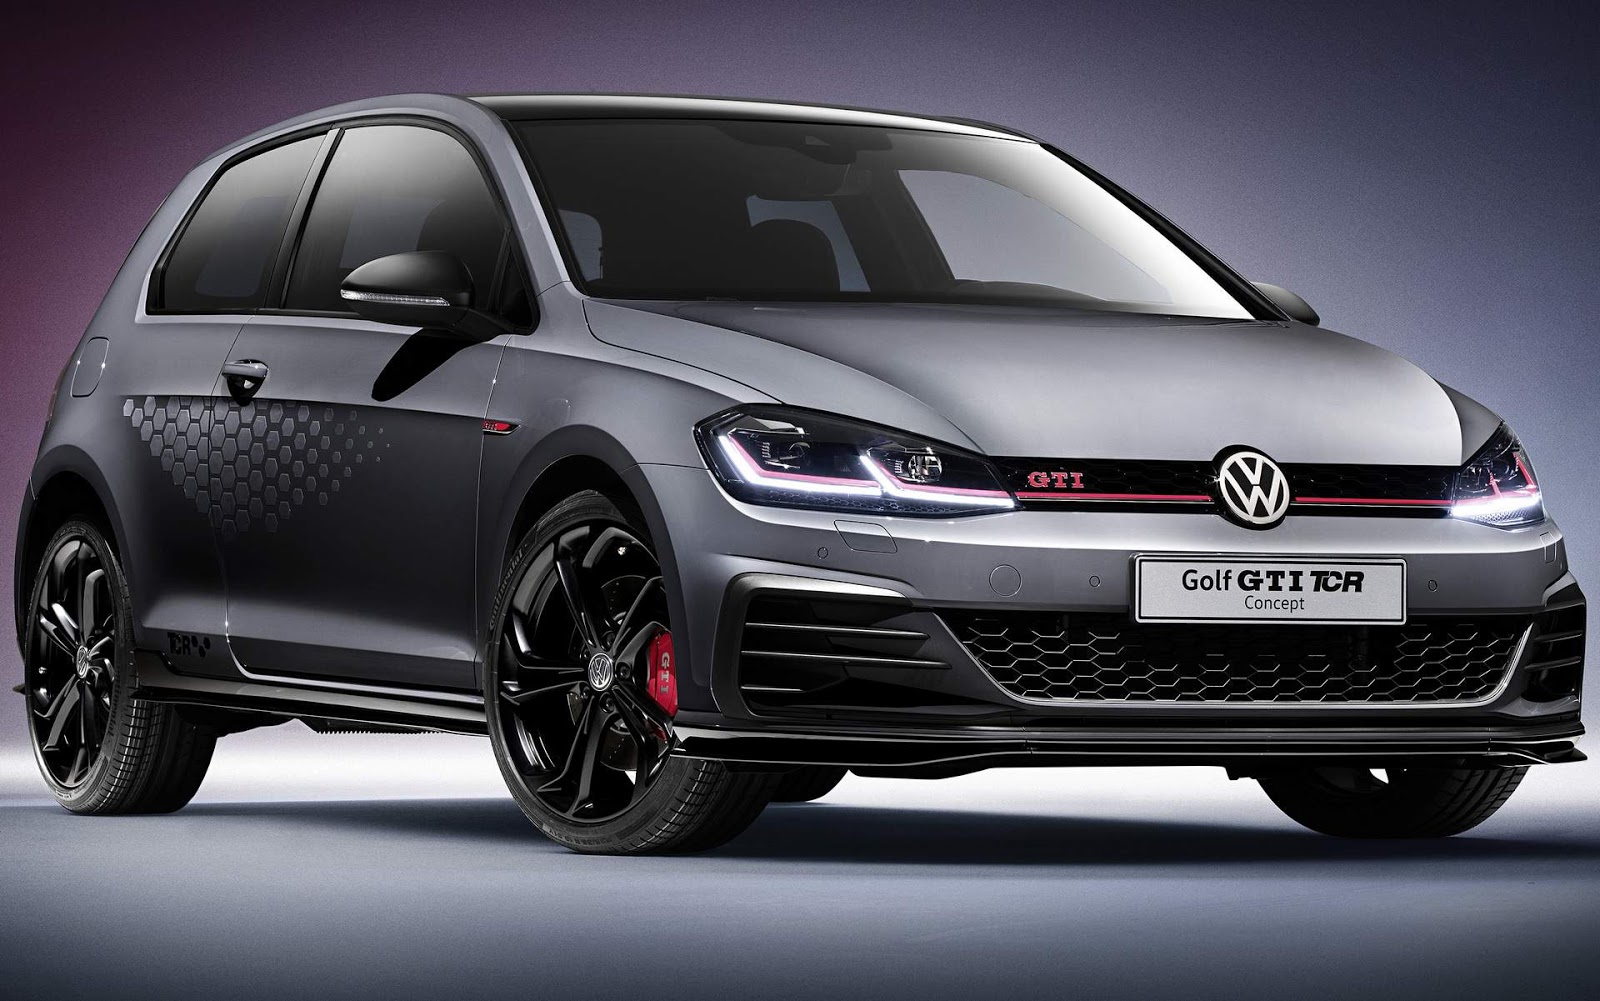 Volkswagen Golf Gti Typ K Price And Specifications | My XXX Hot Girl